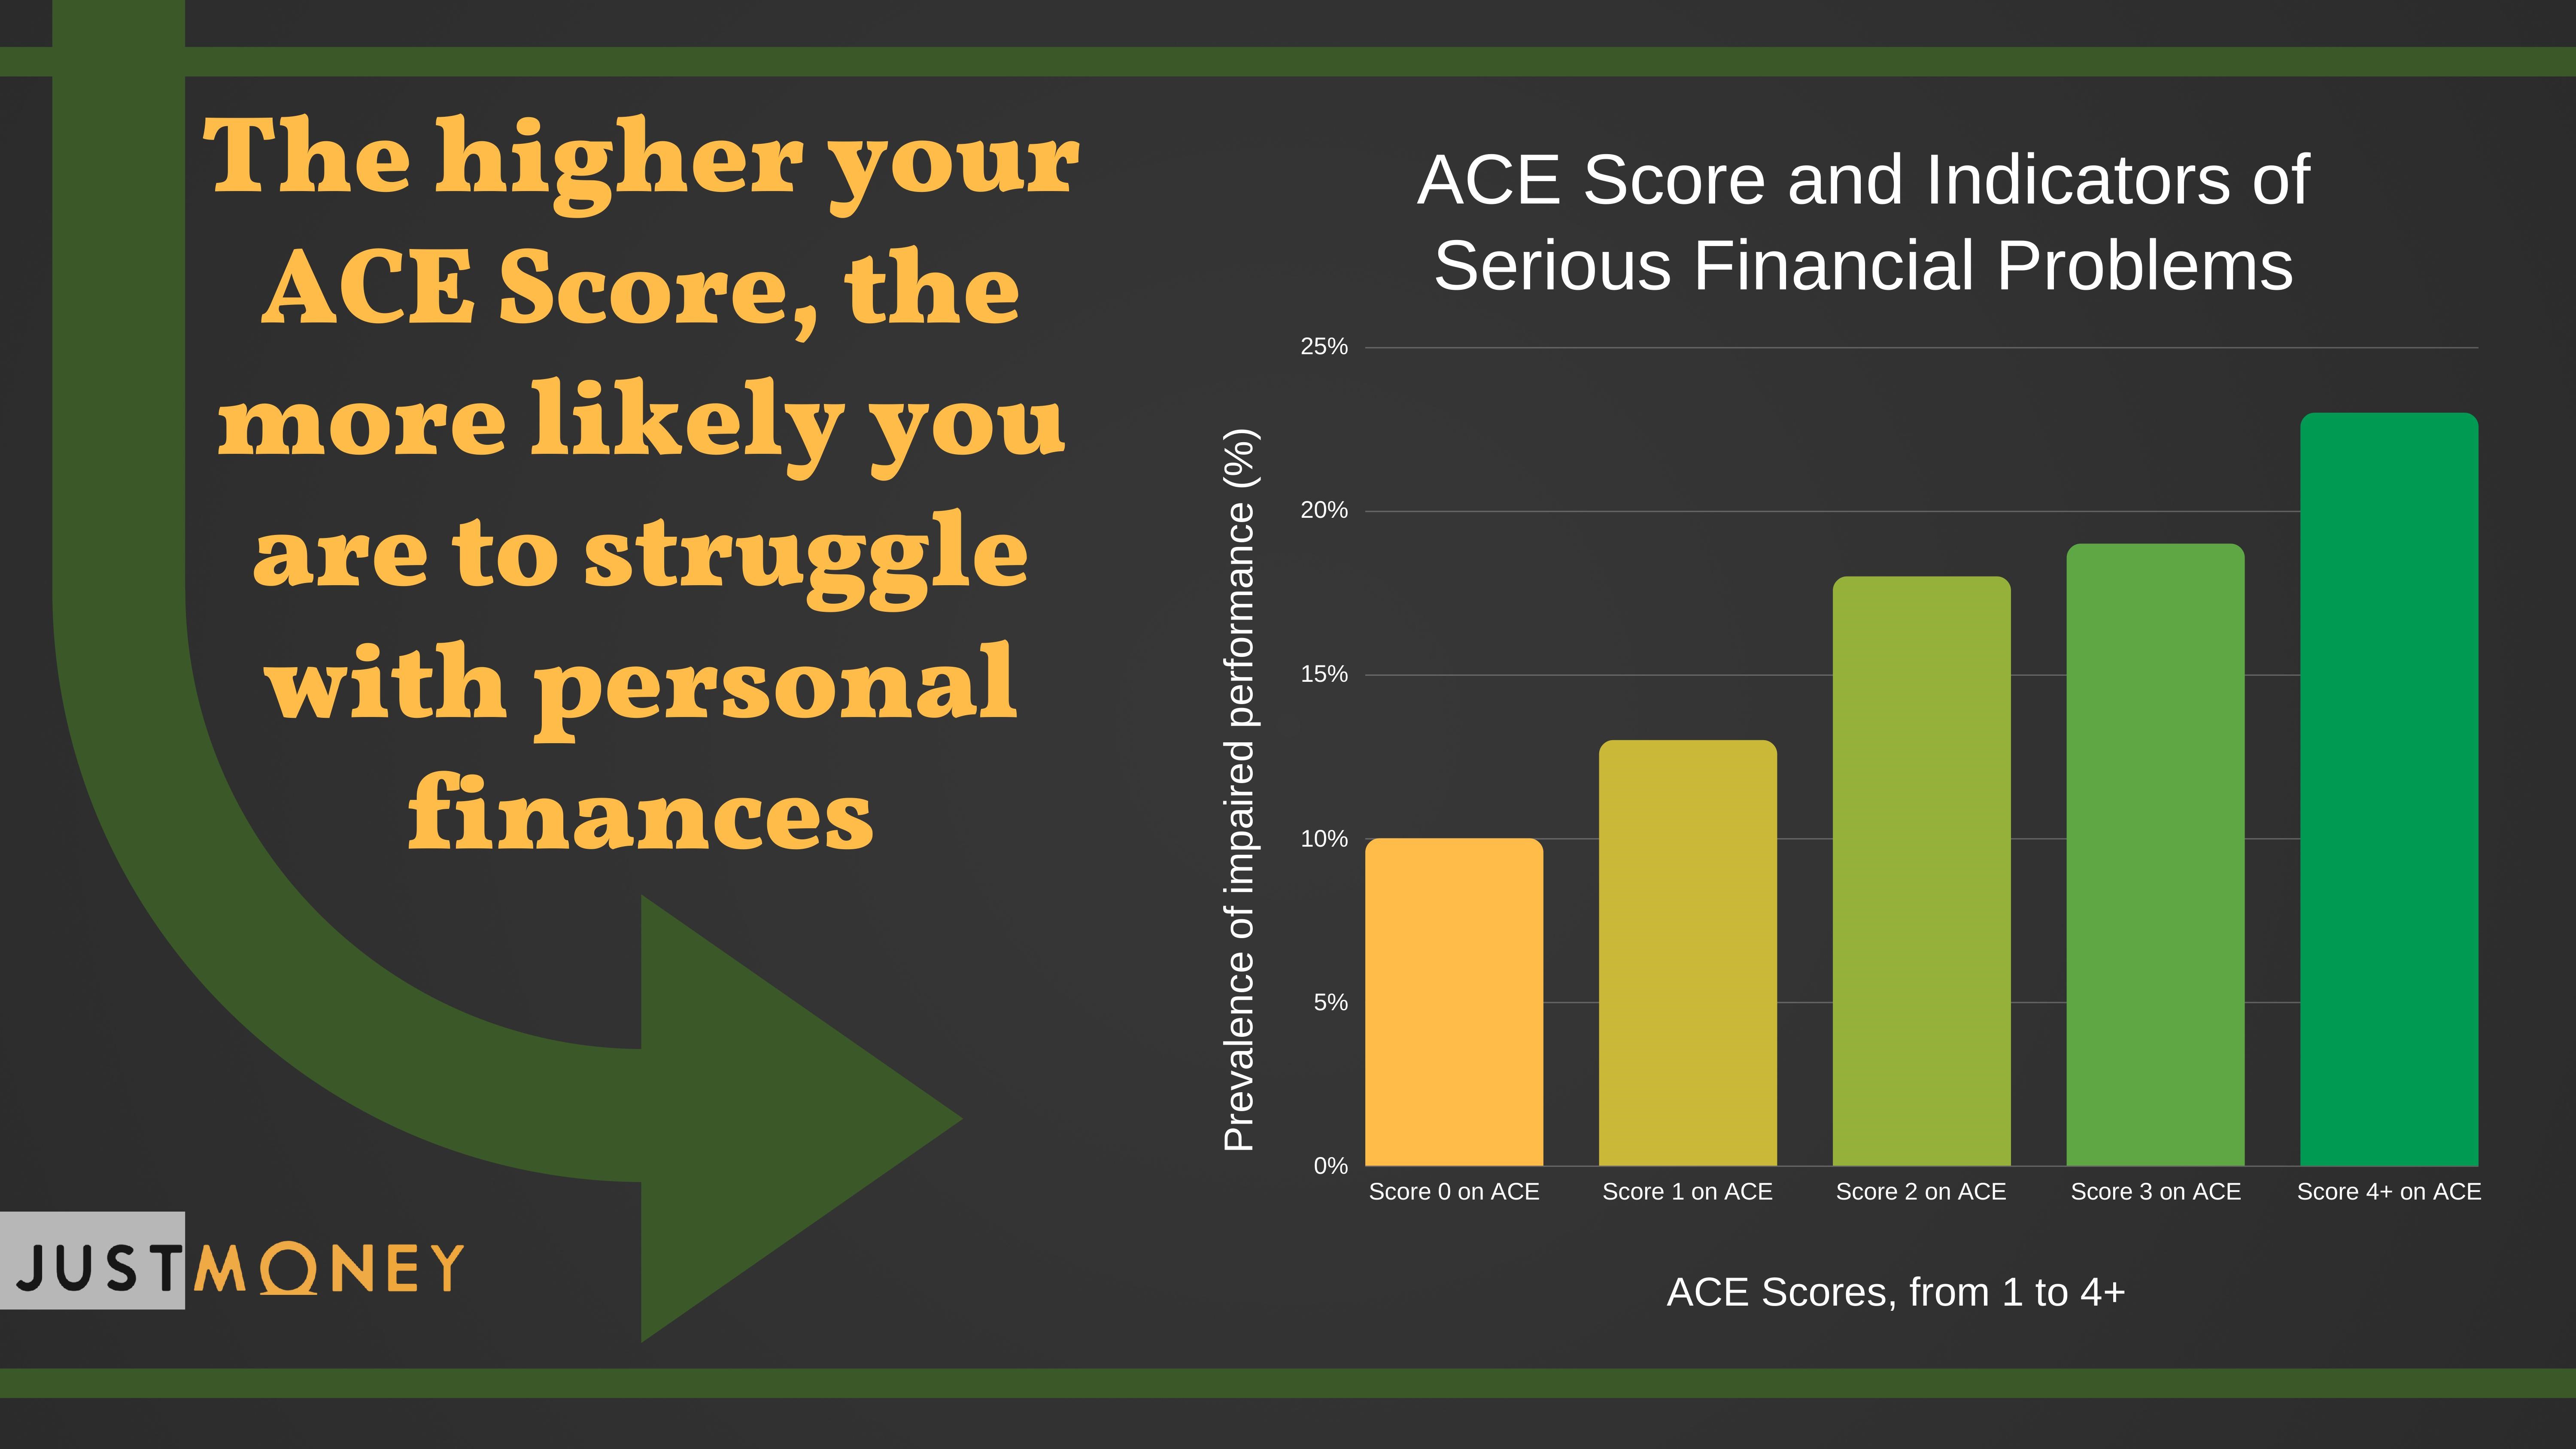 ACE Score and Indicators of Serious Financial Problems